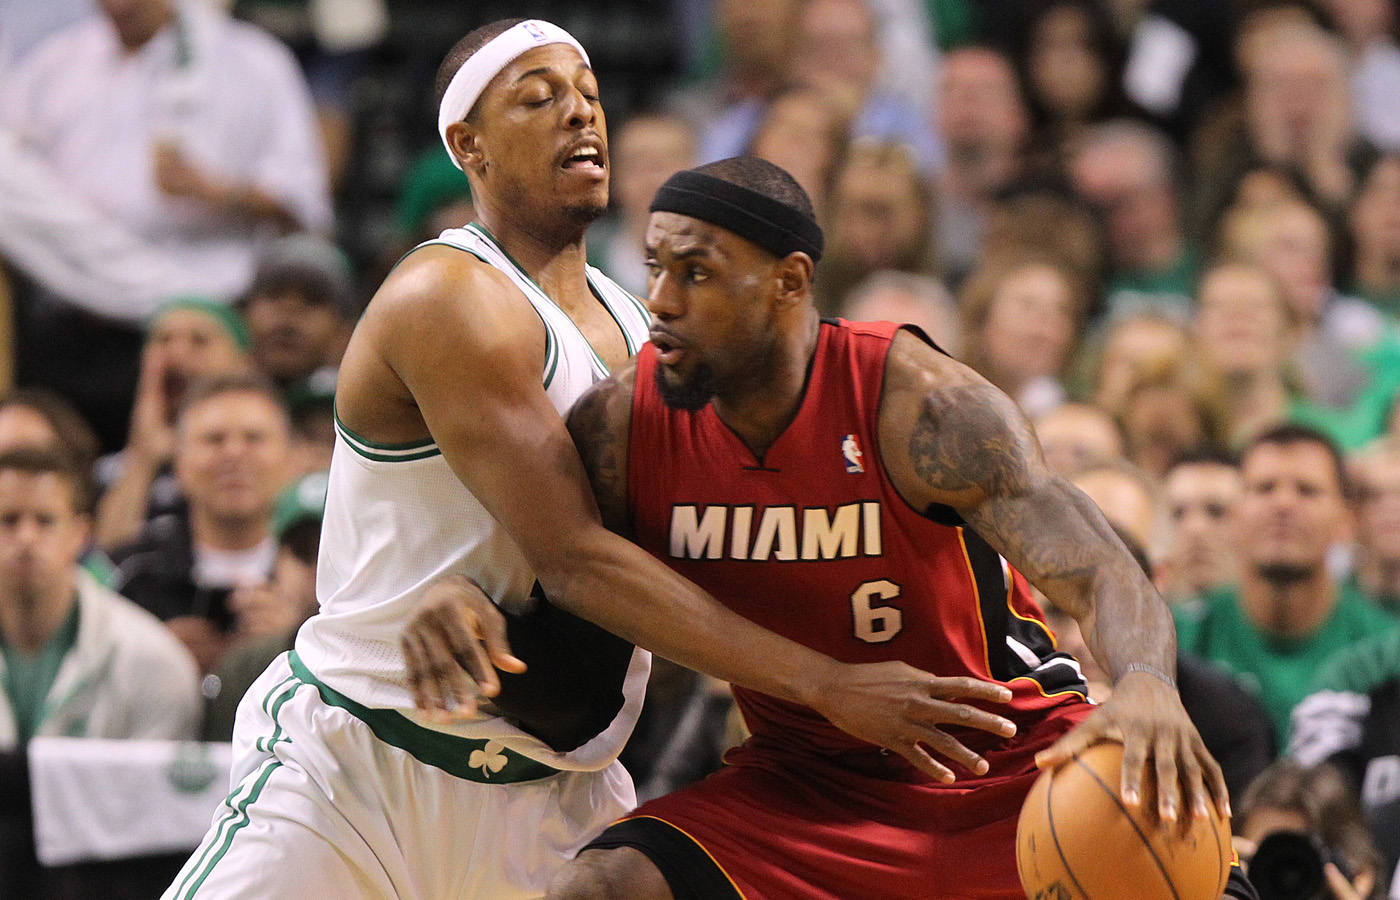 Twitter Reacts To Highlight Reel of LeBron James Schooling Paul Pierce